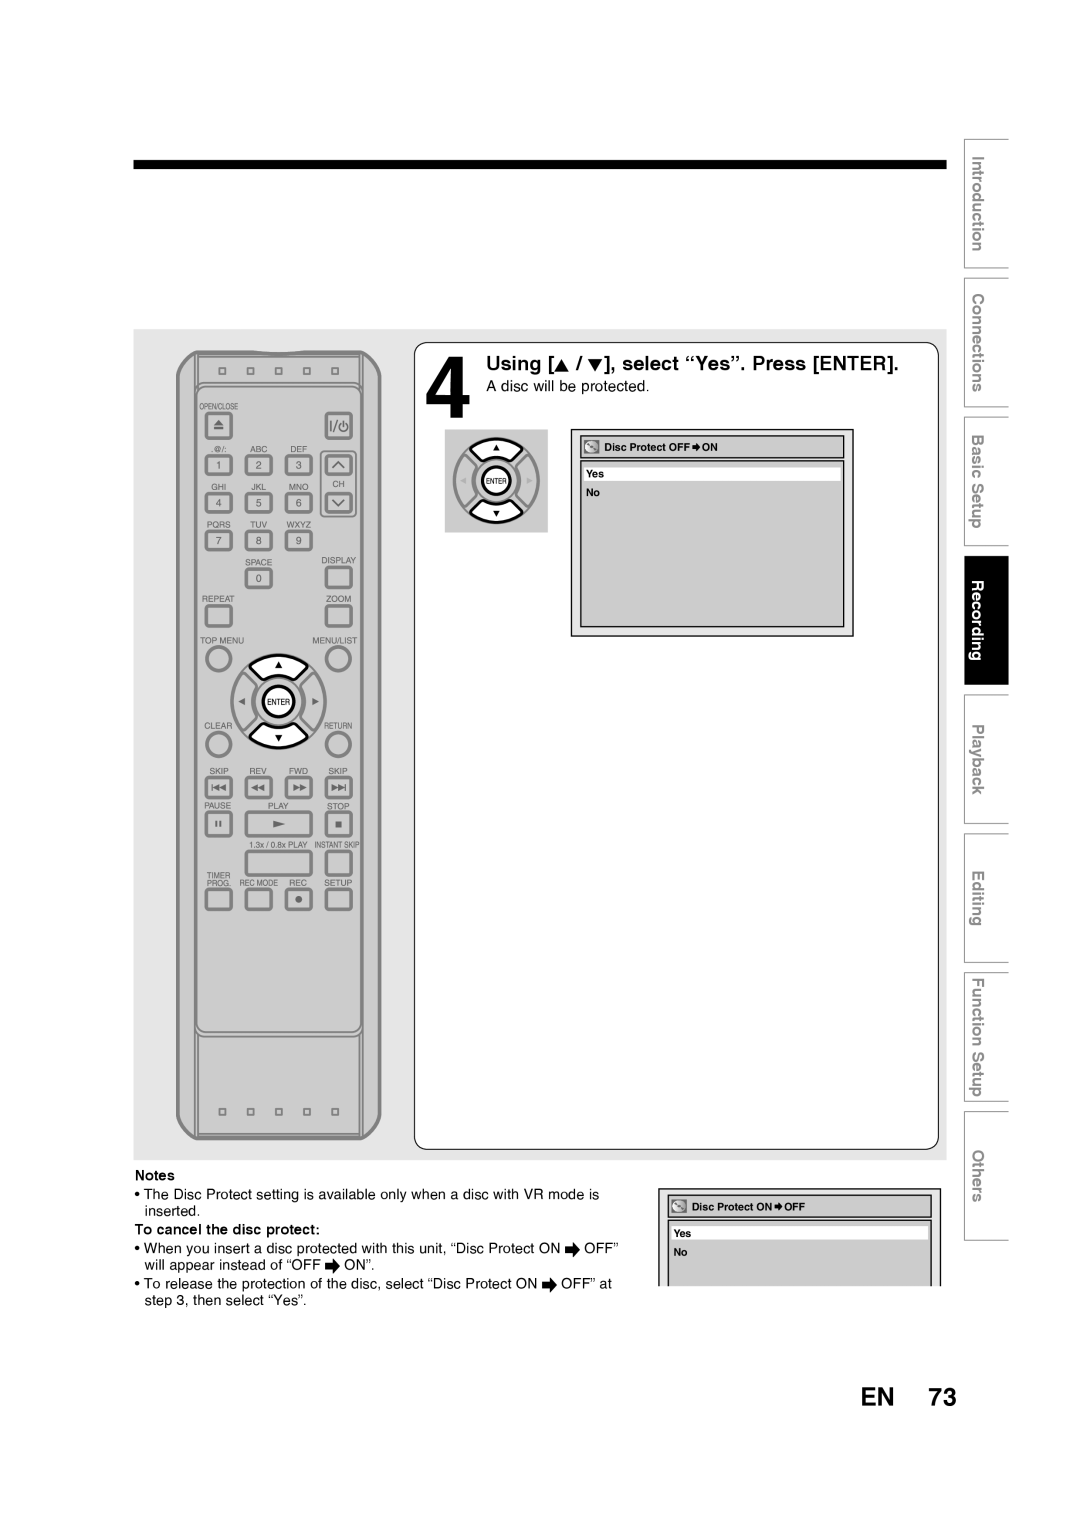 Toshiba D-RW2SU/D-RW2SC Using K / L, select “Yes”. Press ENTER, Editing Function Setup Others, To cancel the disc protect 